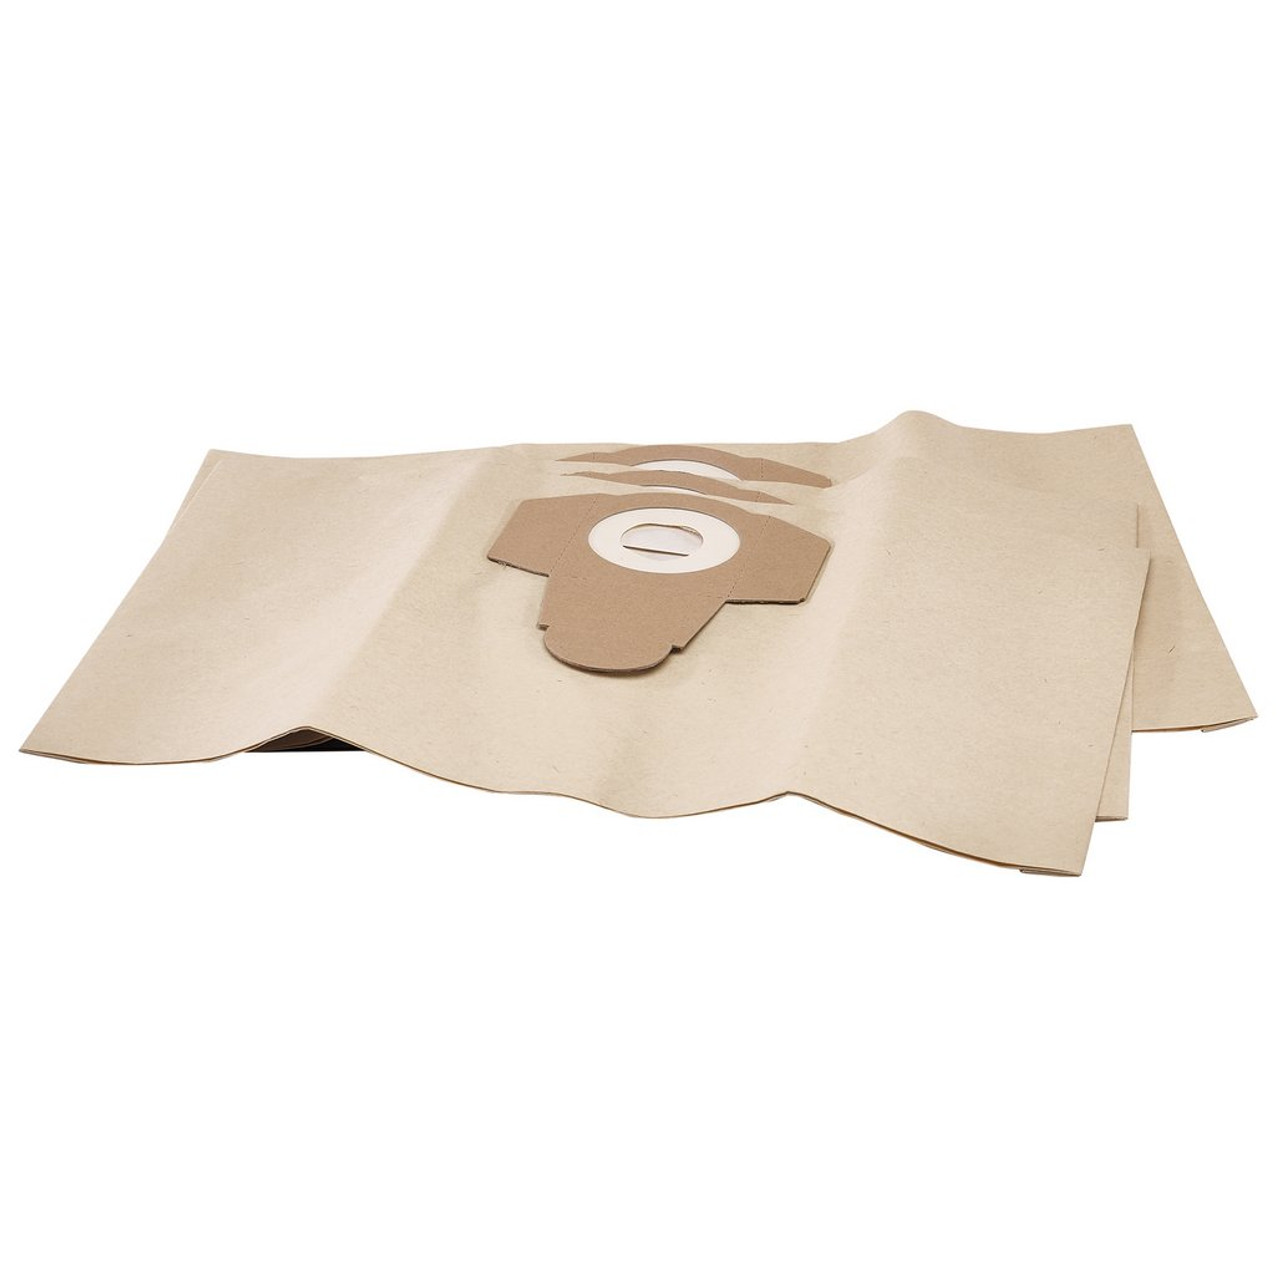 Disposable dust bags for original Sweepovac – Sweepovac